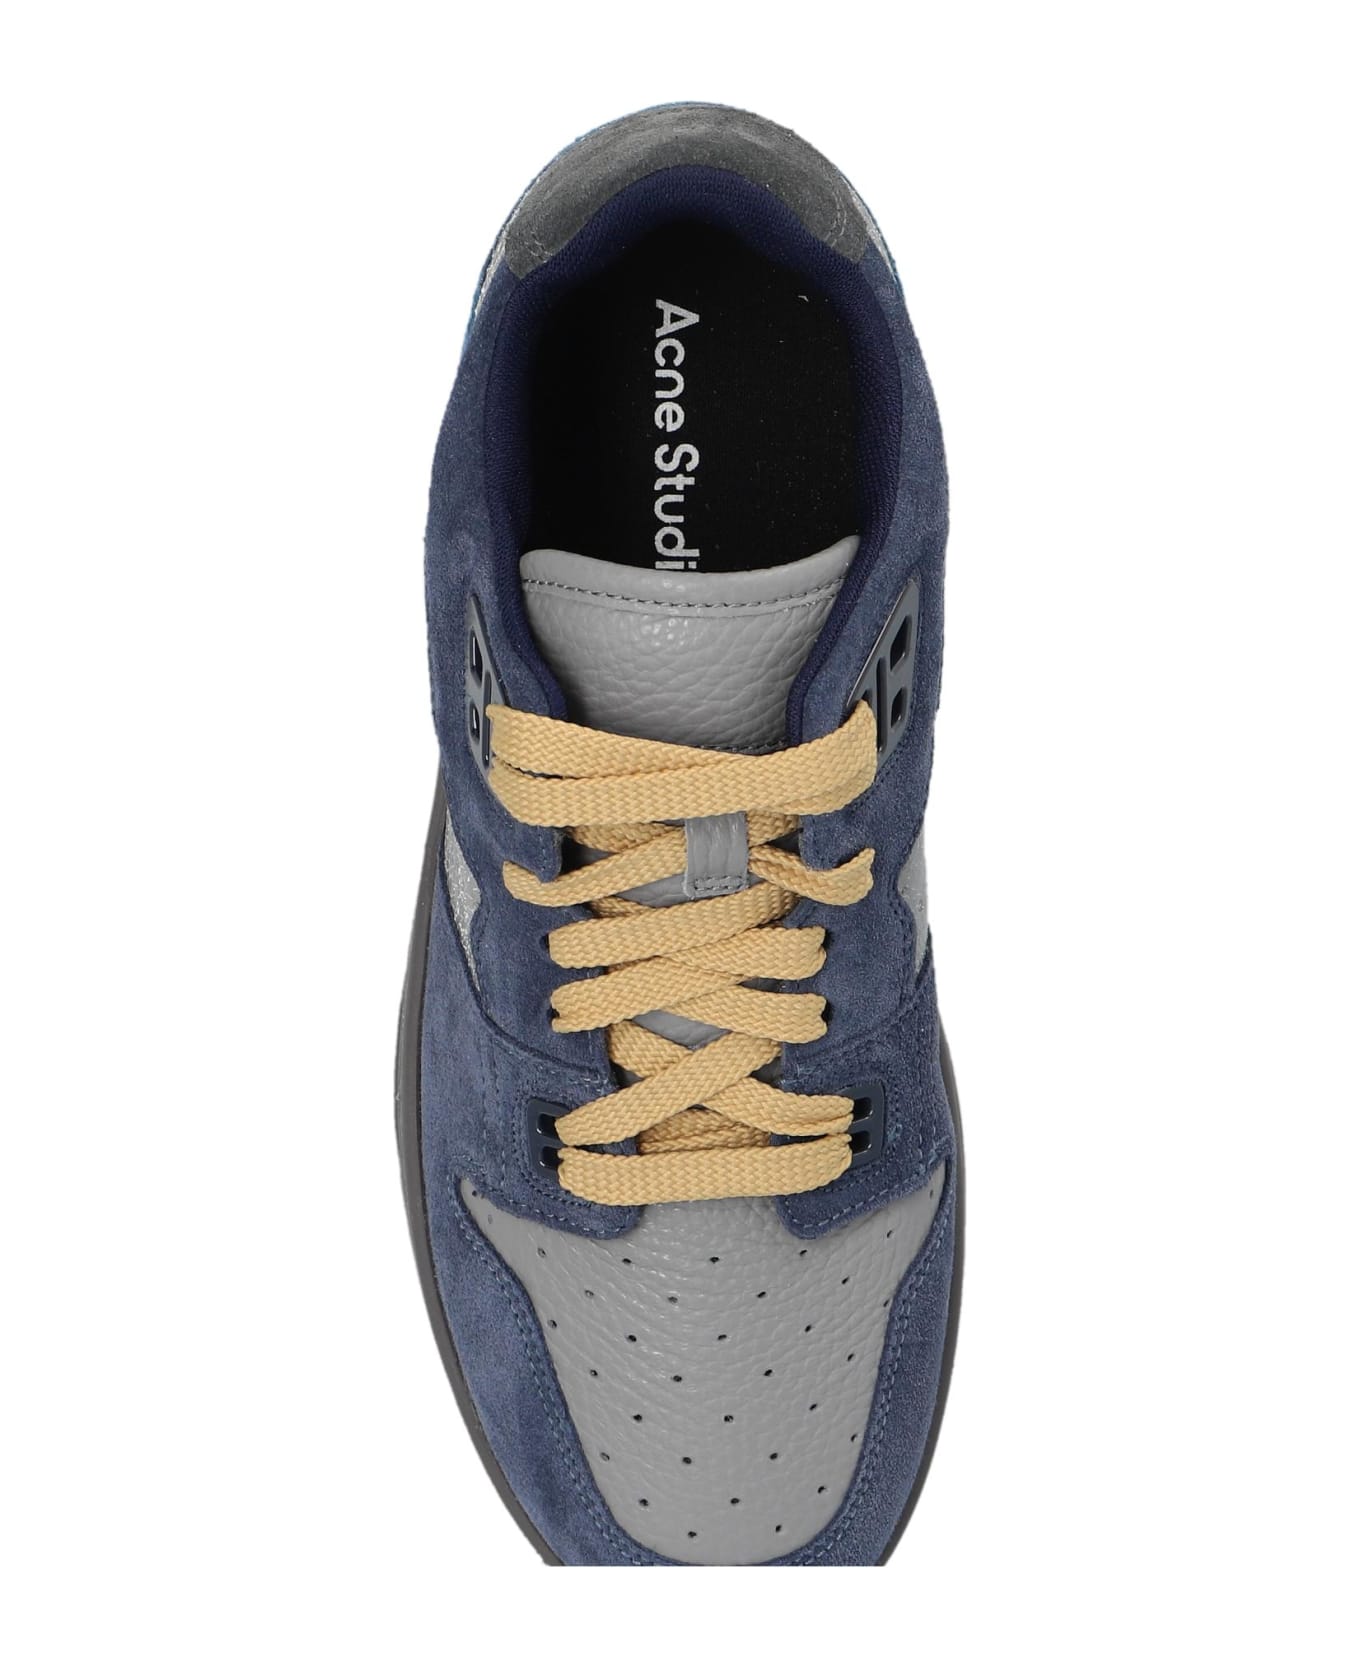 Acne Studios Leather Sneakers - Afs Grey/blue